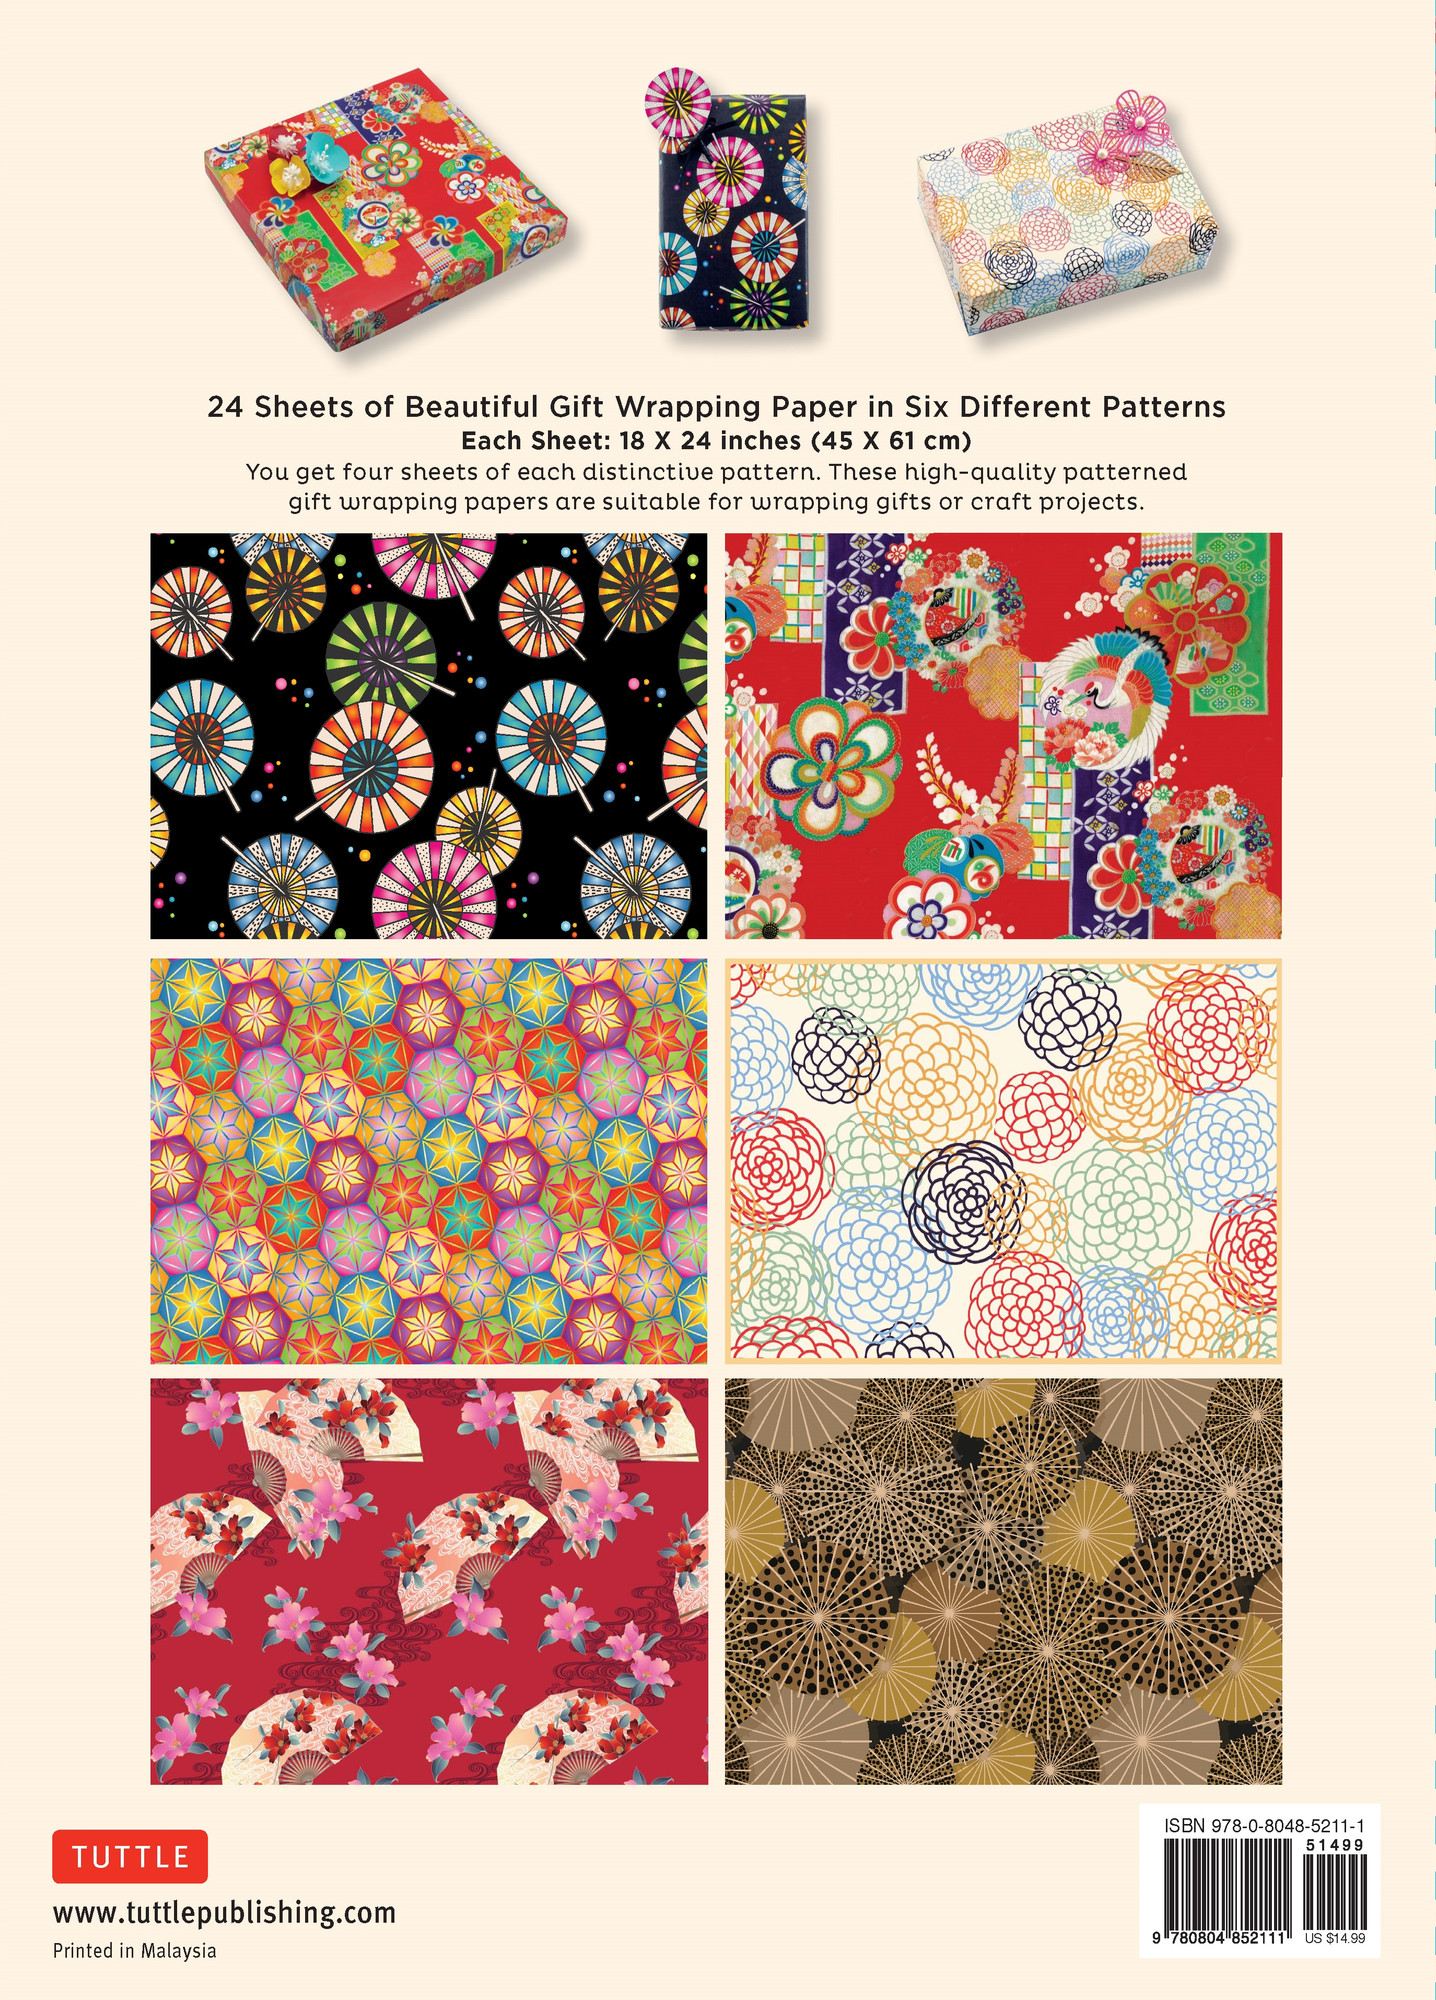 Japanese Kimono Gift Wrapping Papers: 12 Sheets of High-Quality 18 X 24 Inch Wrapping Paper